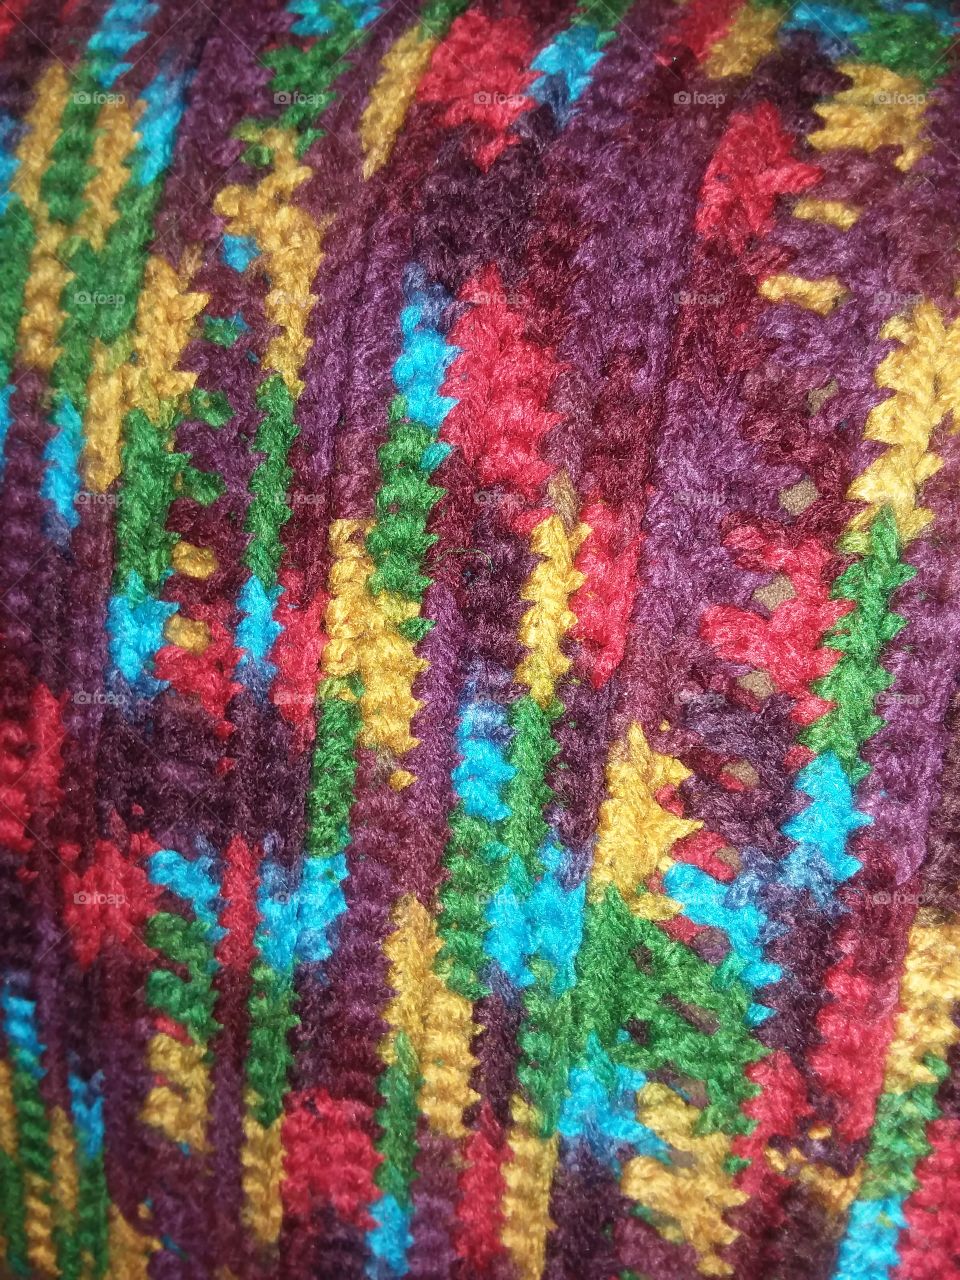 Handmade Crocheted Blanket in Green, Blue, Red, Yellow, Brown and Purple